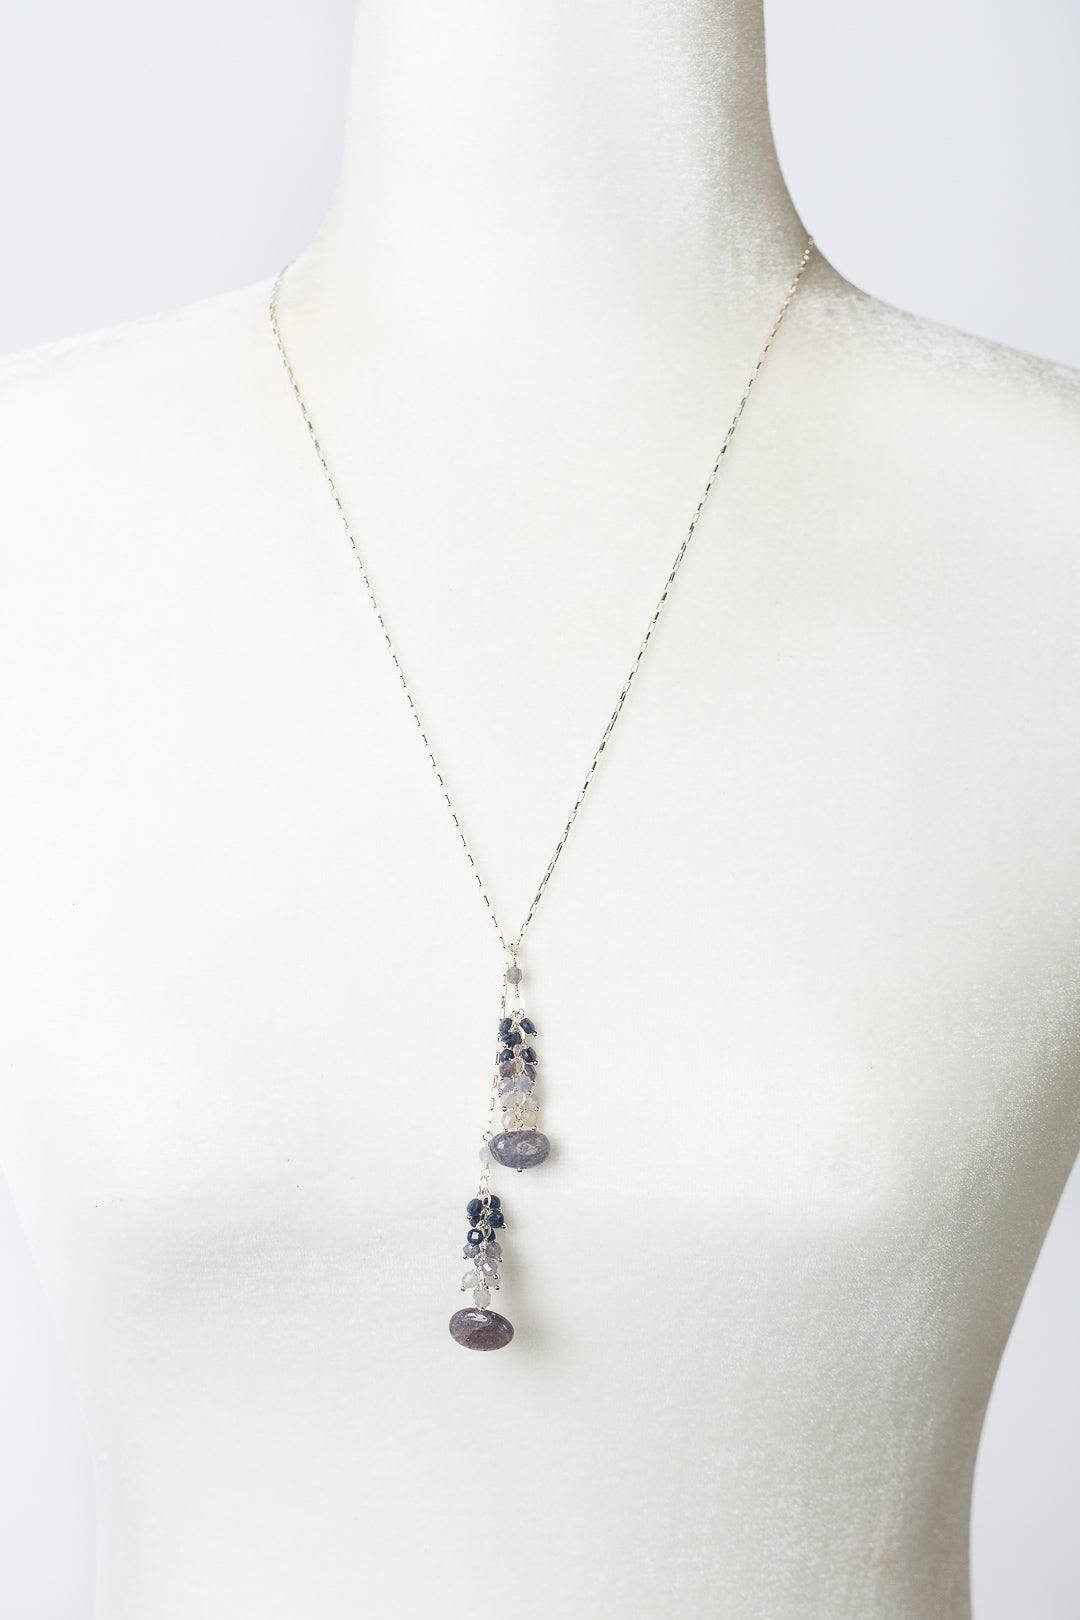 Ethereal 26.5" Iolite With Sodalite Cluster Lariat Necklace